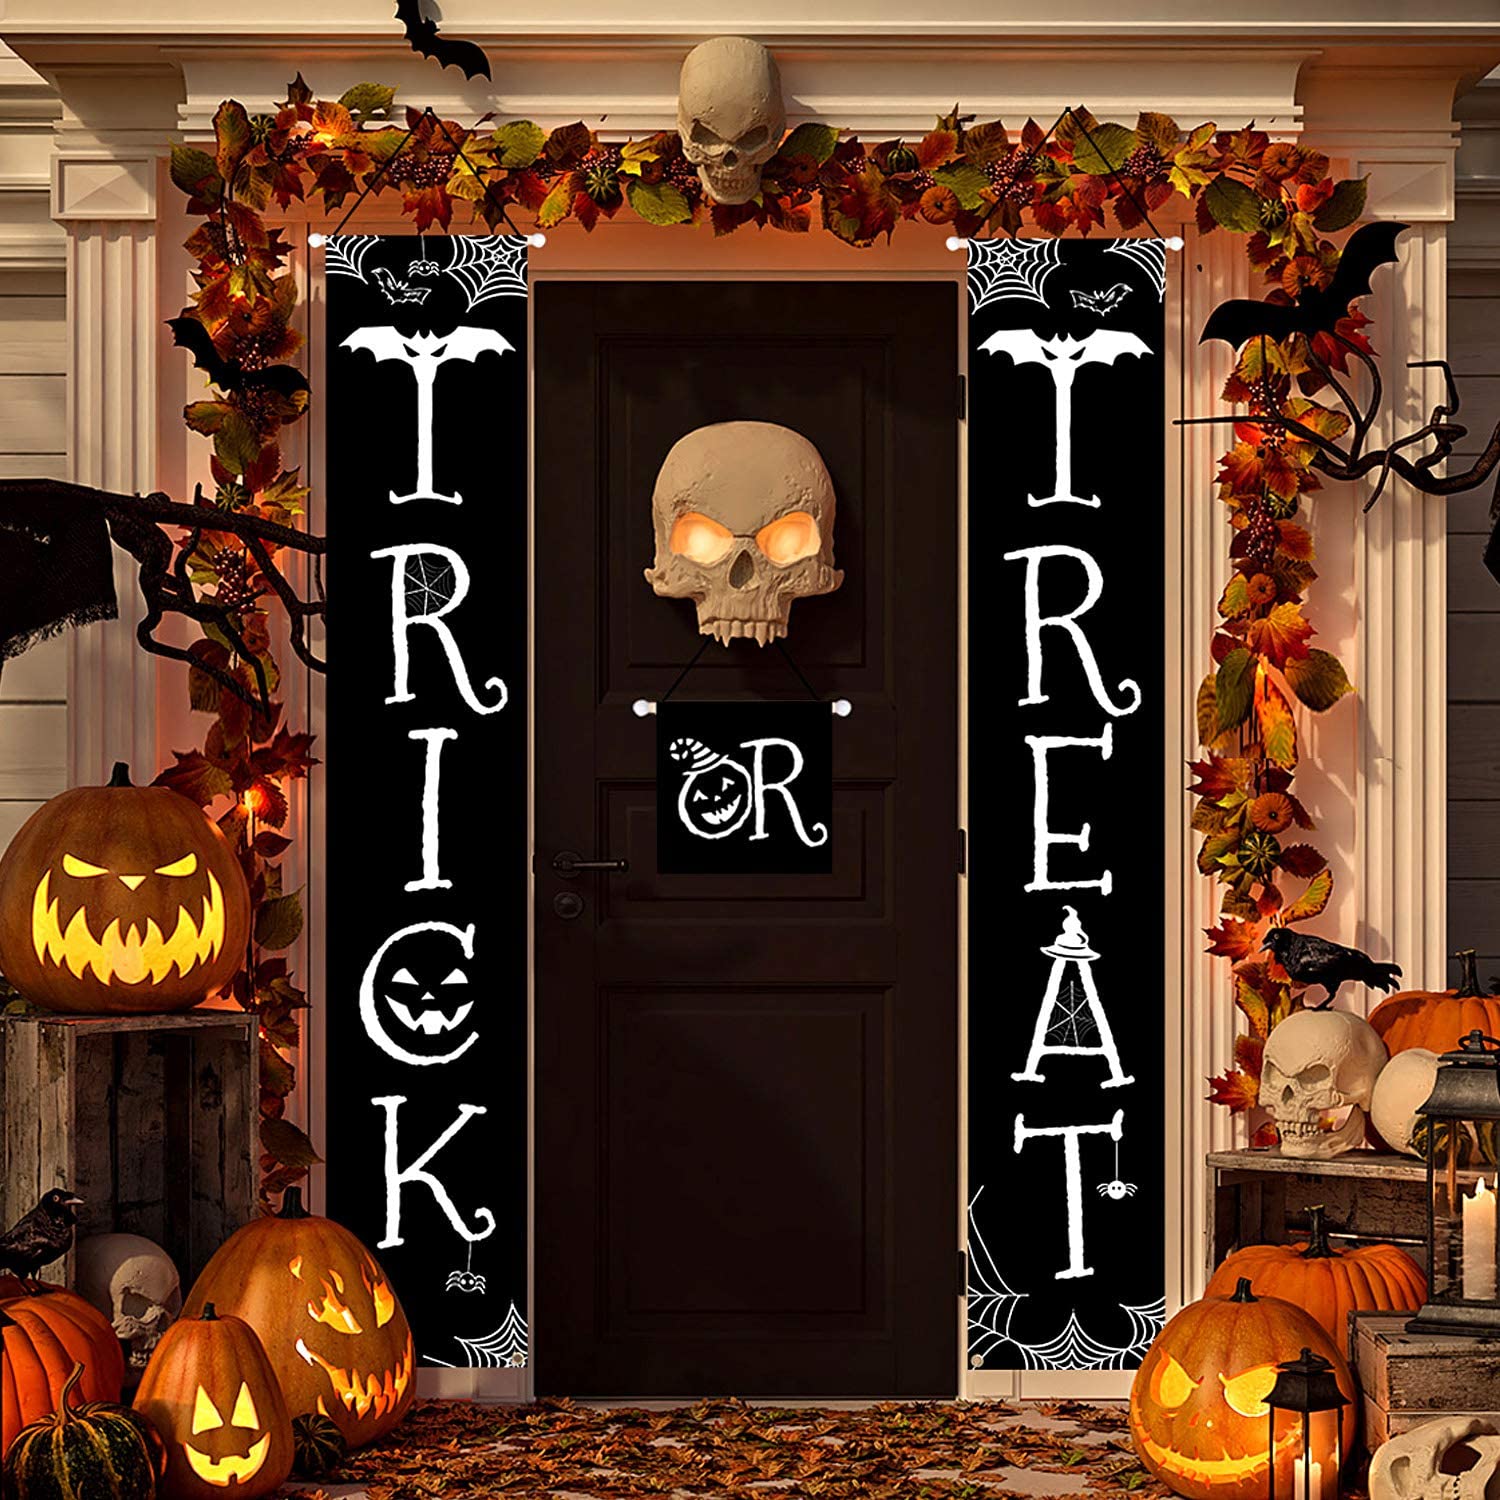 Details about   Halloween Banners Trick or Treat,Outdoor Indoor Halloween Decorations Welcome or 